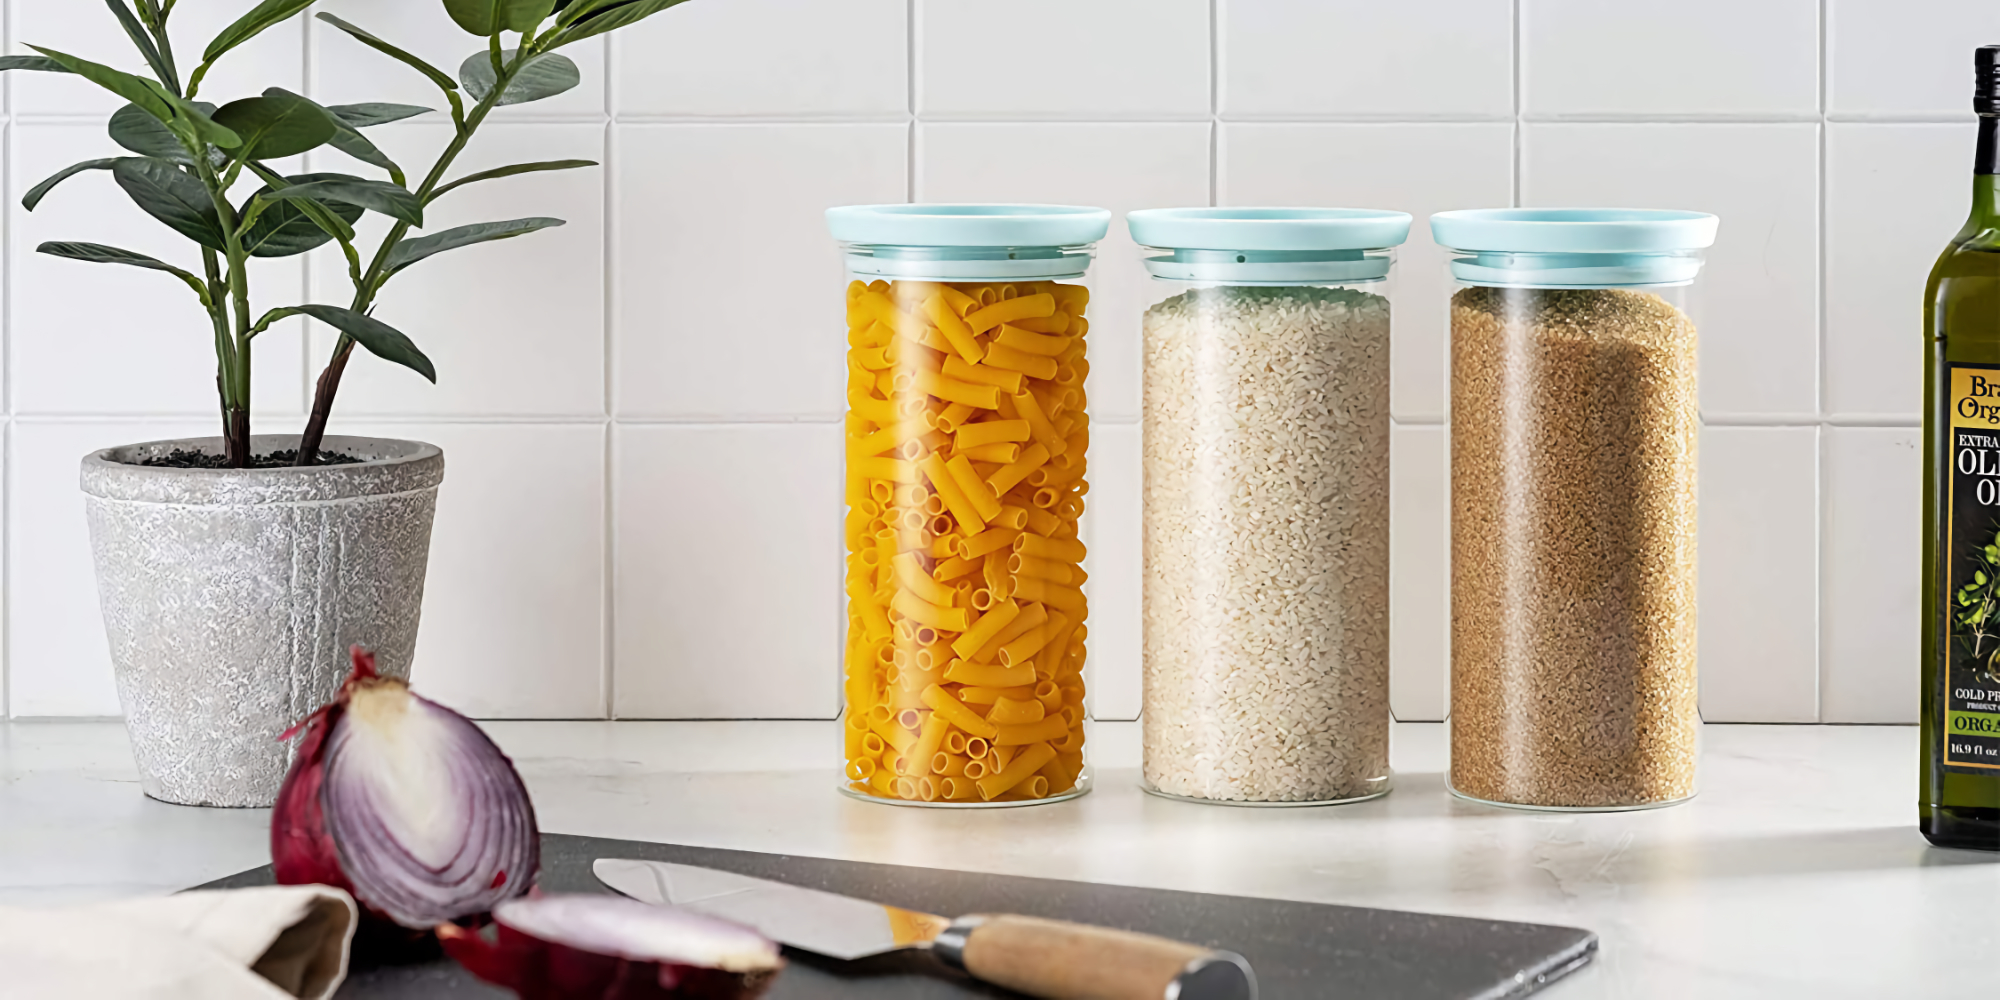 https://9to5toys.com/wp-content/uploads/sites/5/2021/10/Godinger-Large-Glass-Food-Storage-Containers.jpg